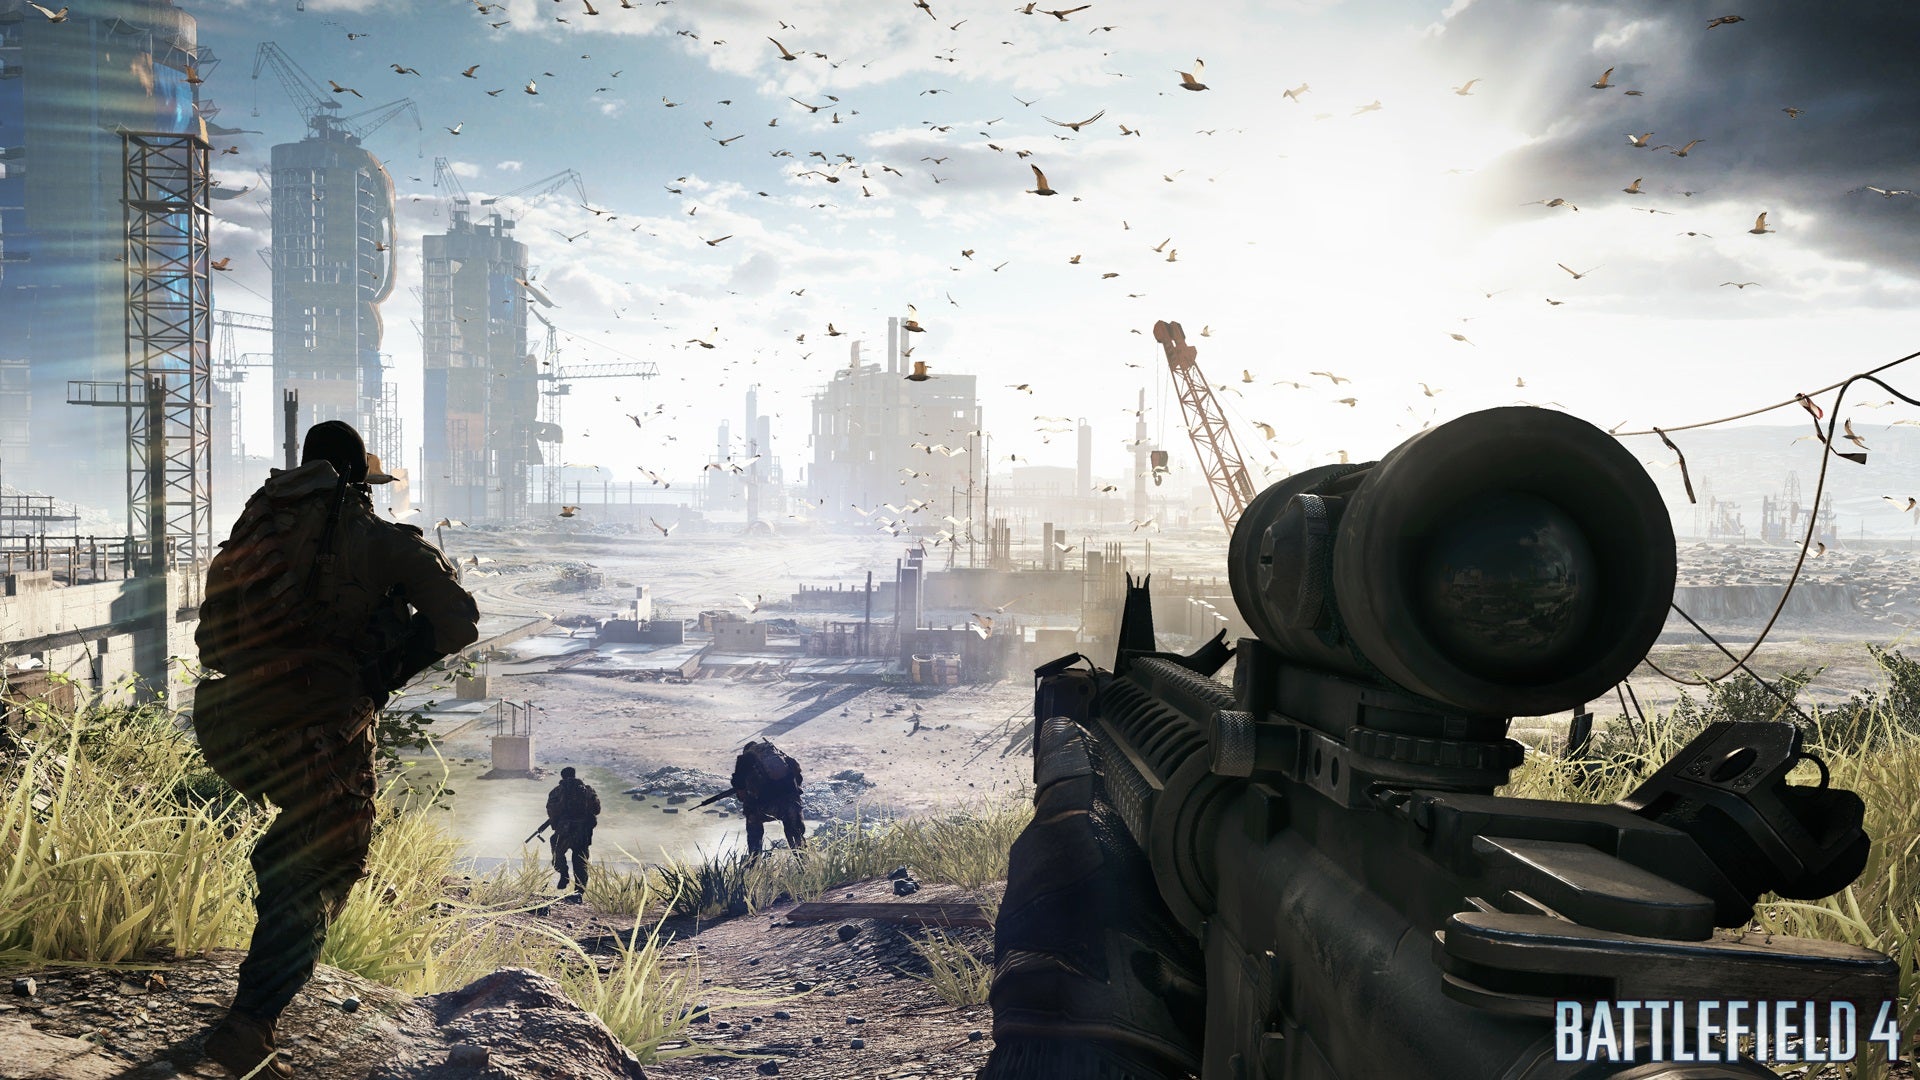 A screenshot from EA's Battlefield 4, run using the Frostbite engine